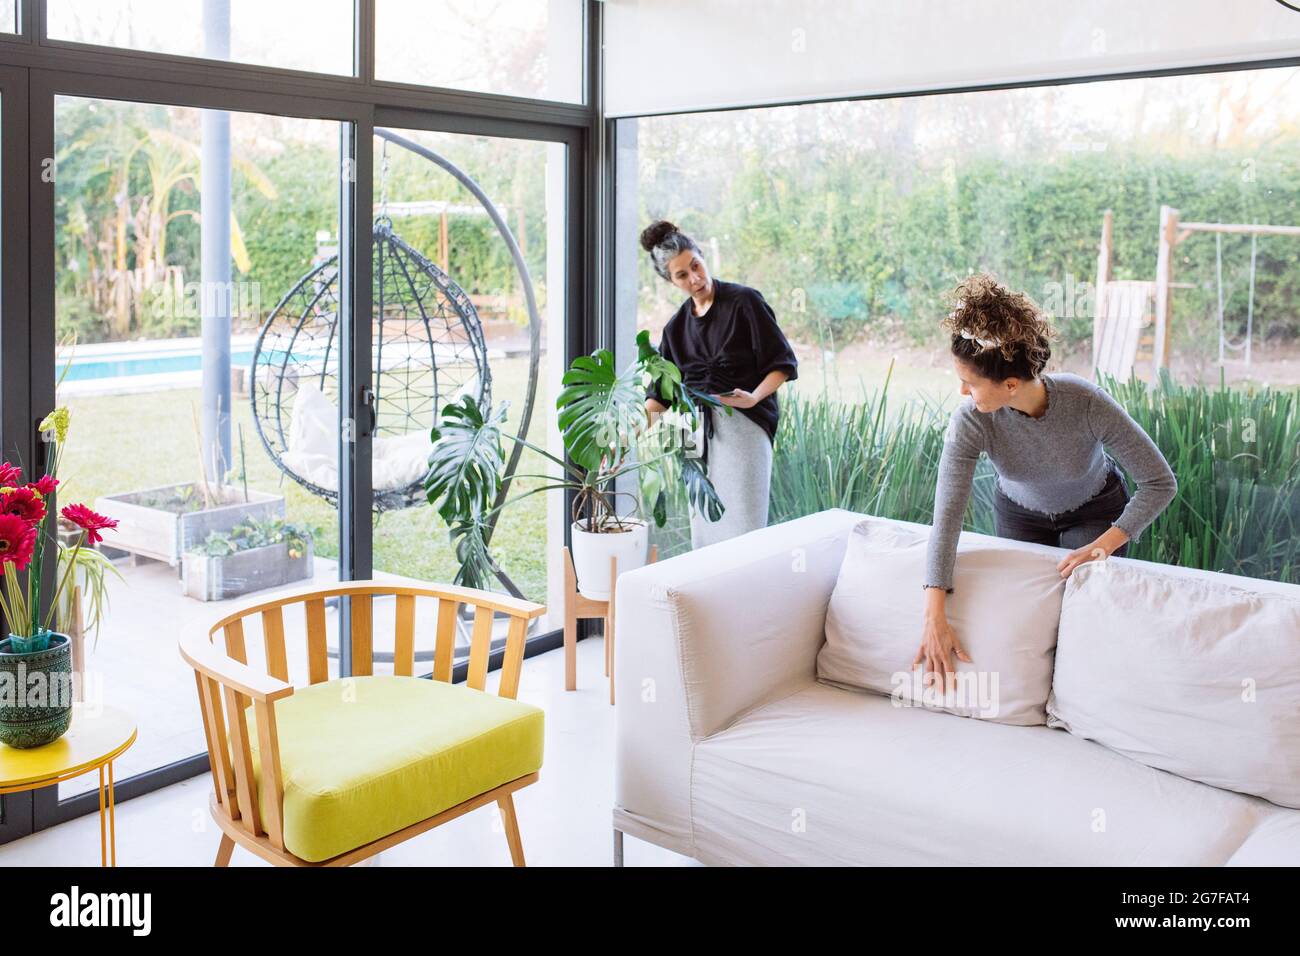 2 women, a caucasian and a latino, working on home staging a living room with big windows and a green backyard Stock Photo